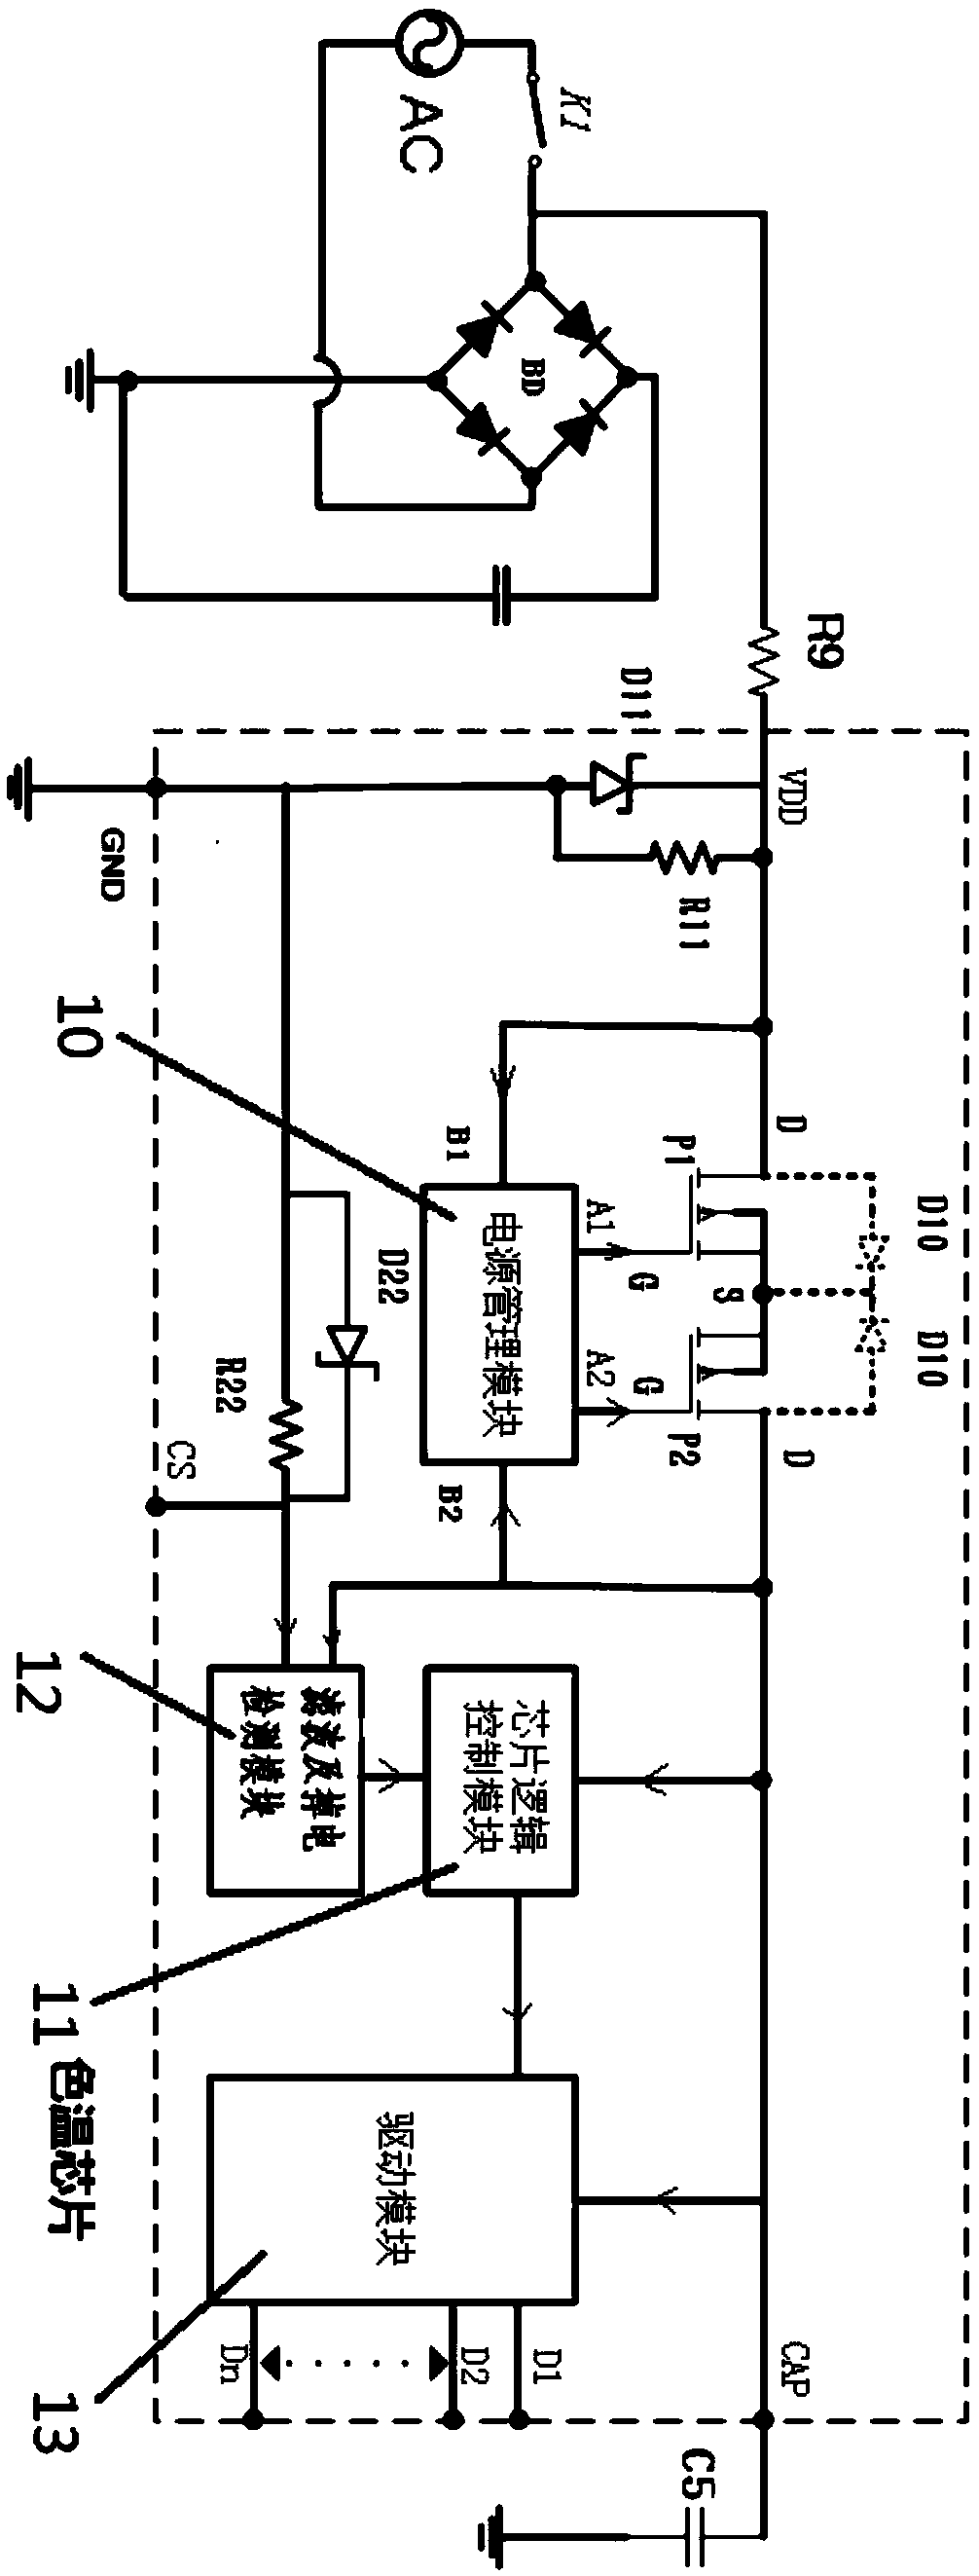 A color temperature chip for detecting LED wall switches and a circuit using the color temperature chip